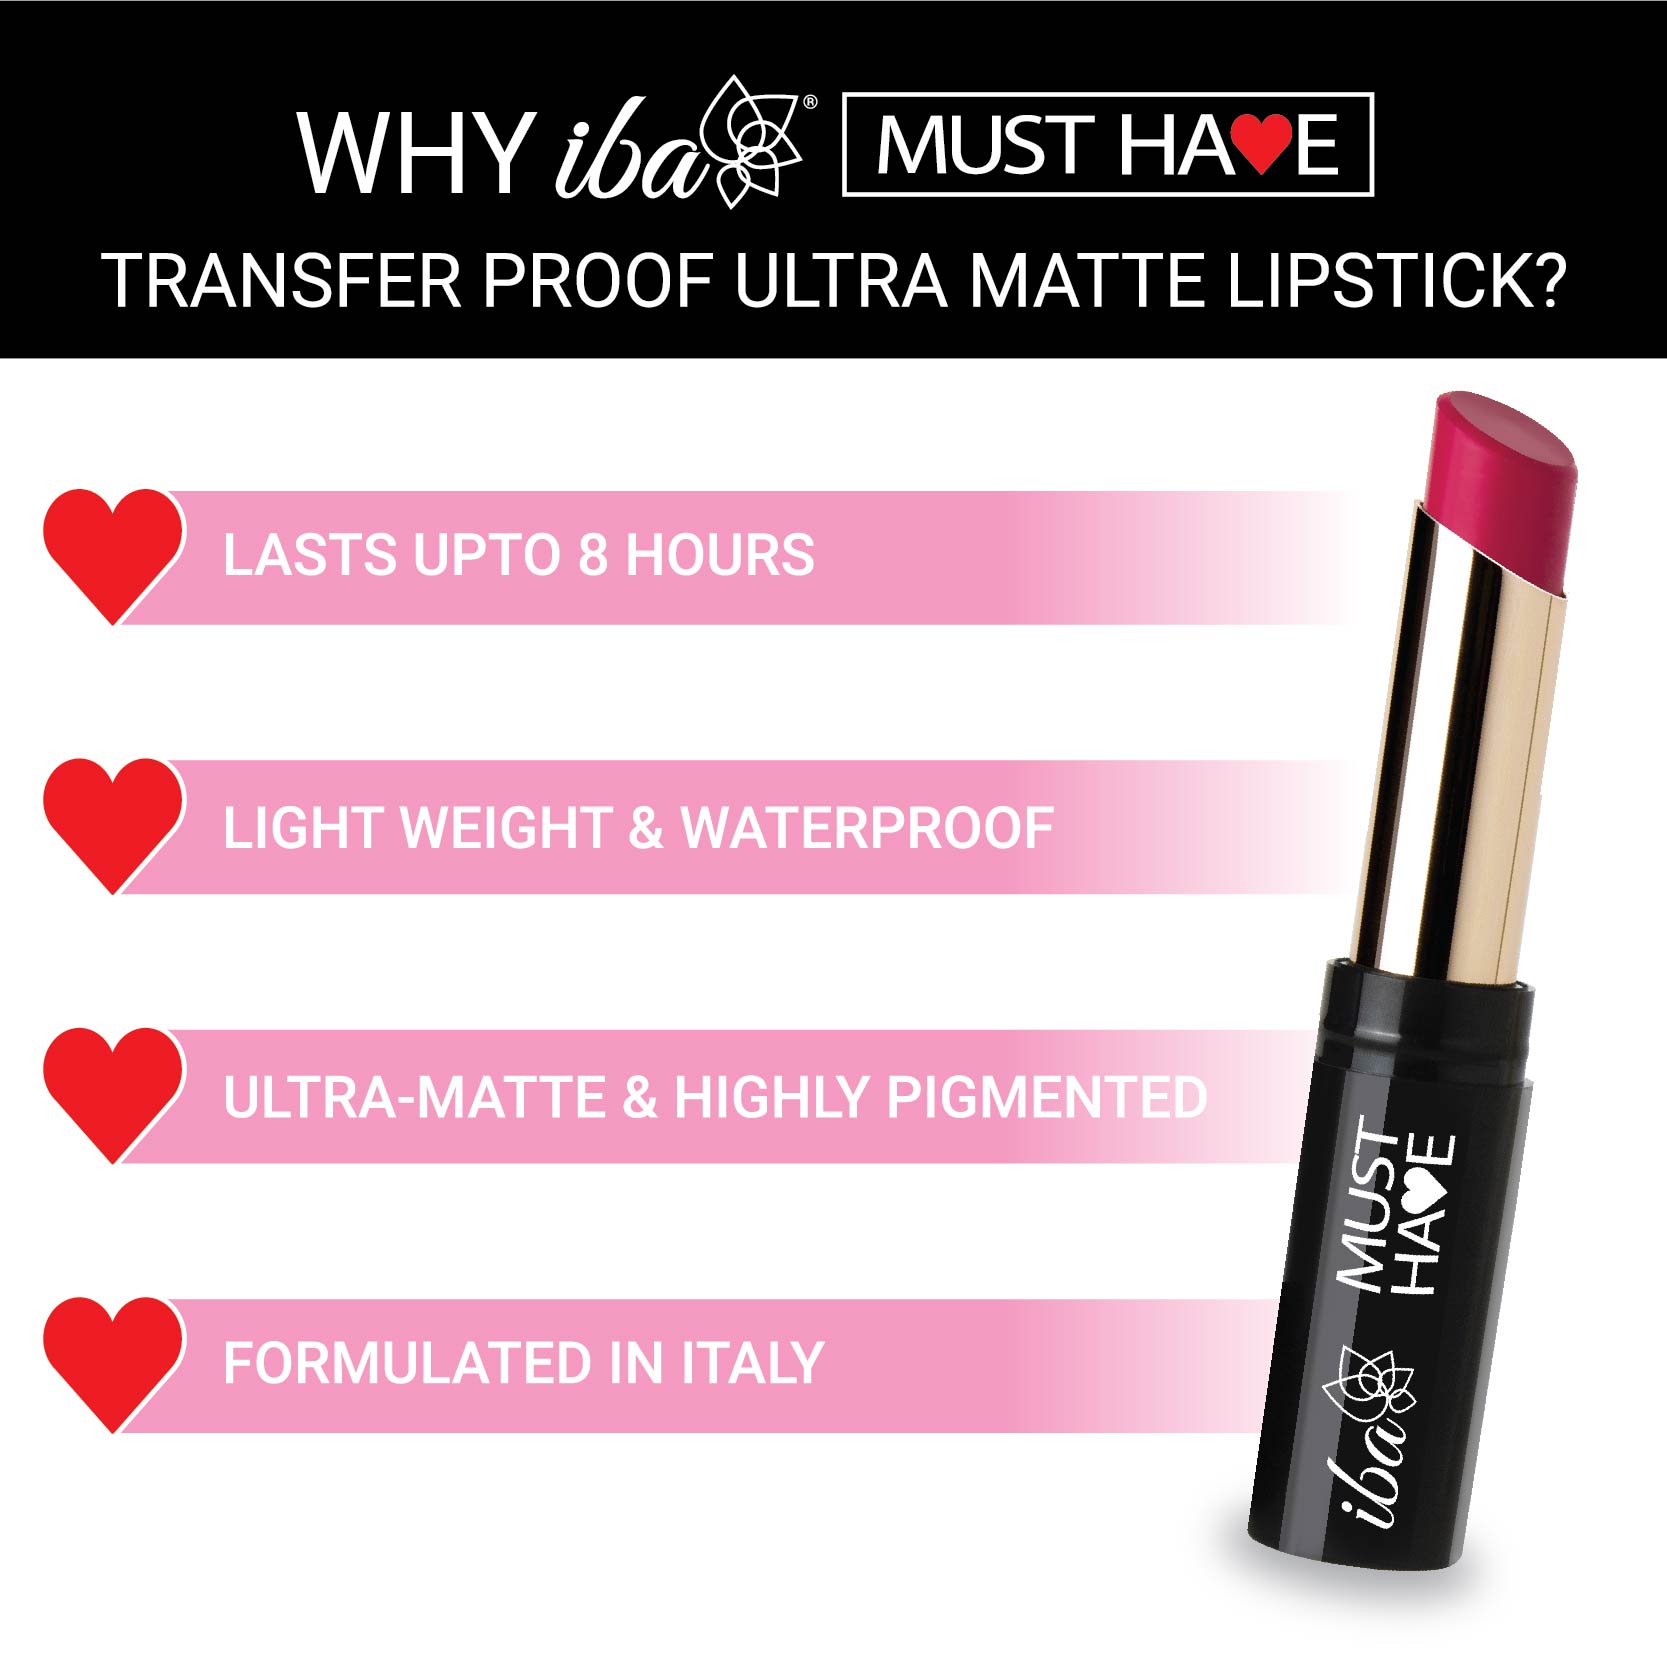 Iba Must Have Transfer Proof Matte Lipstick Features